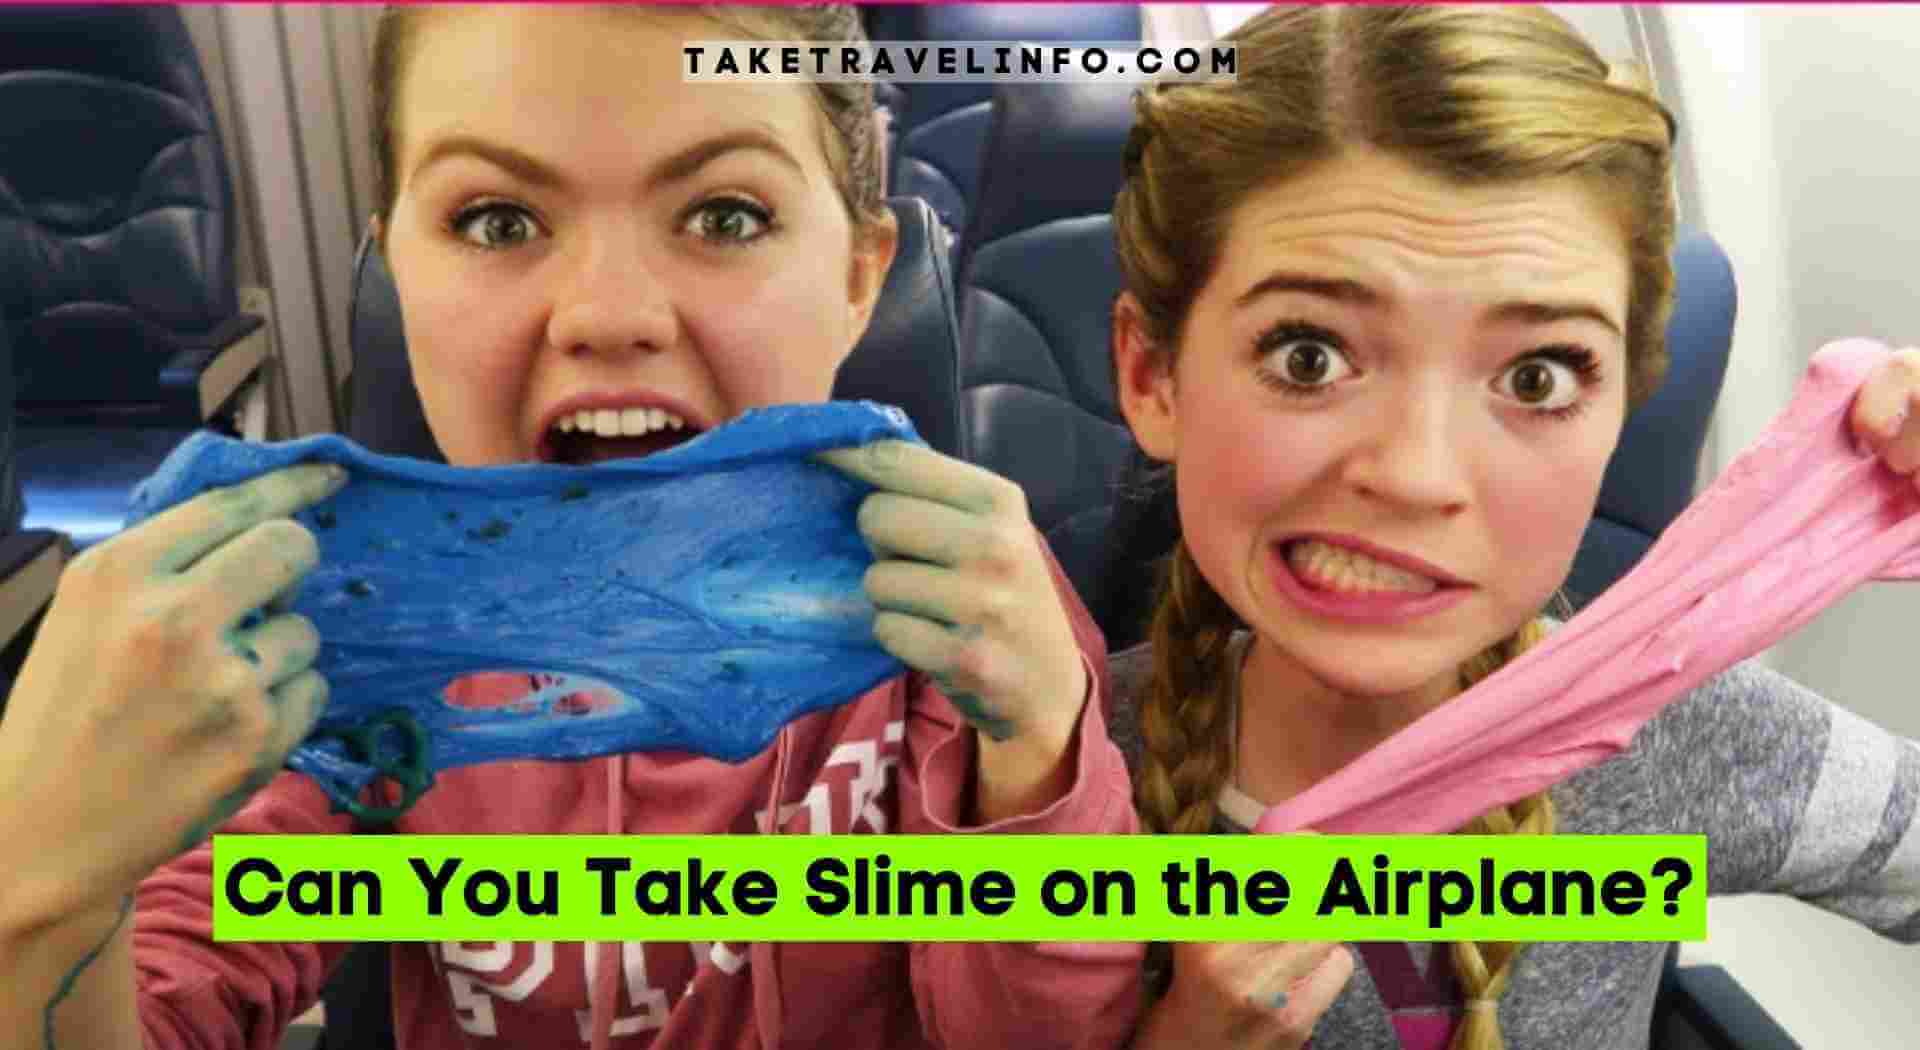 Can You Take Slime on the Airplane?